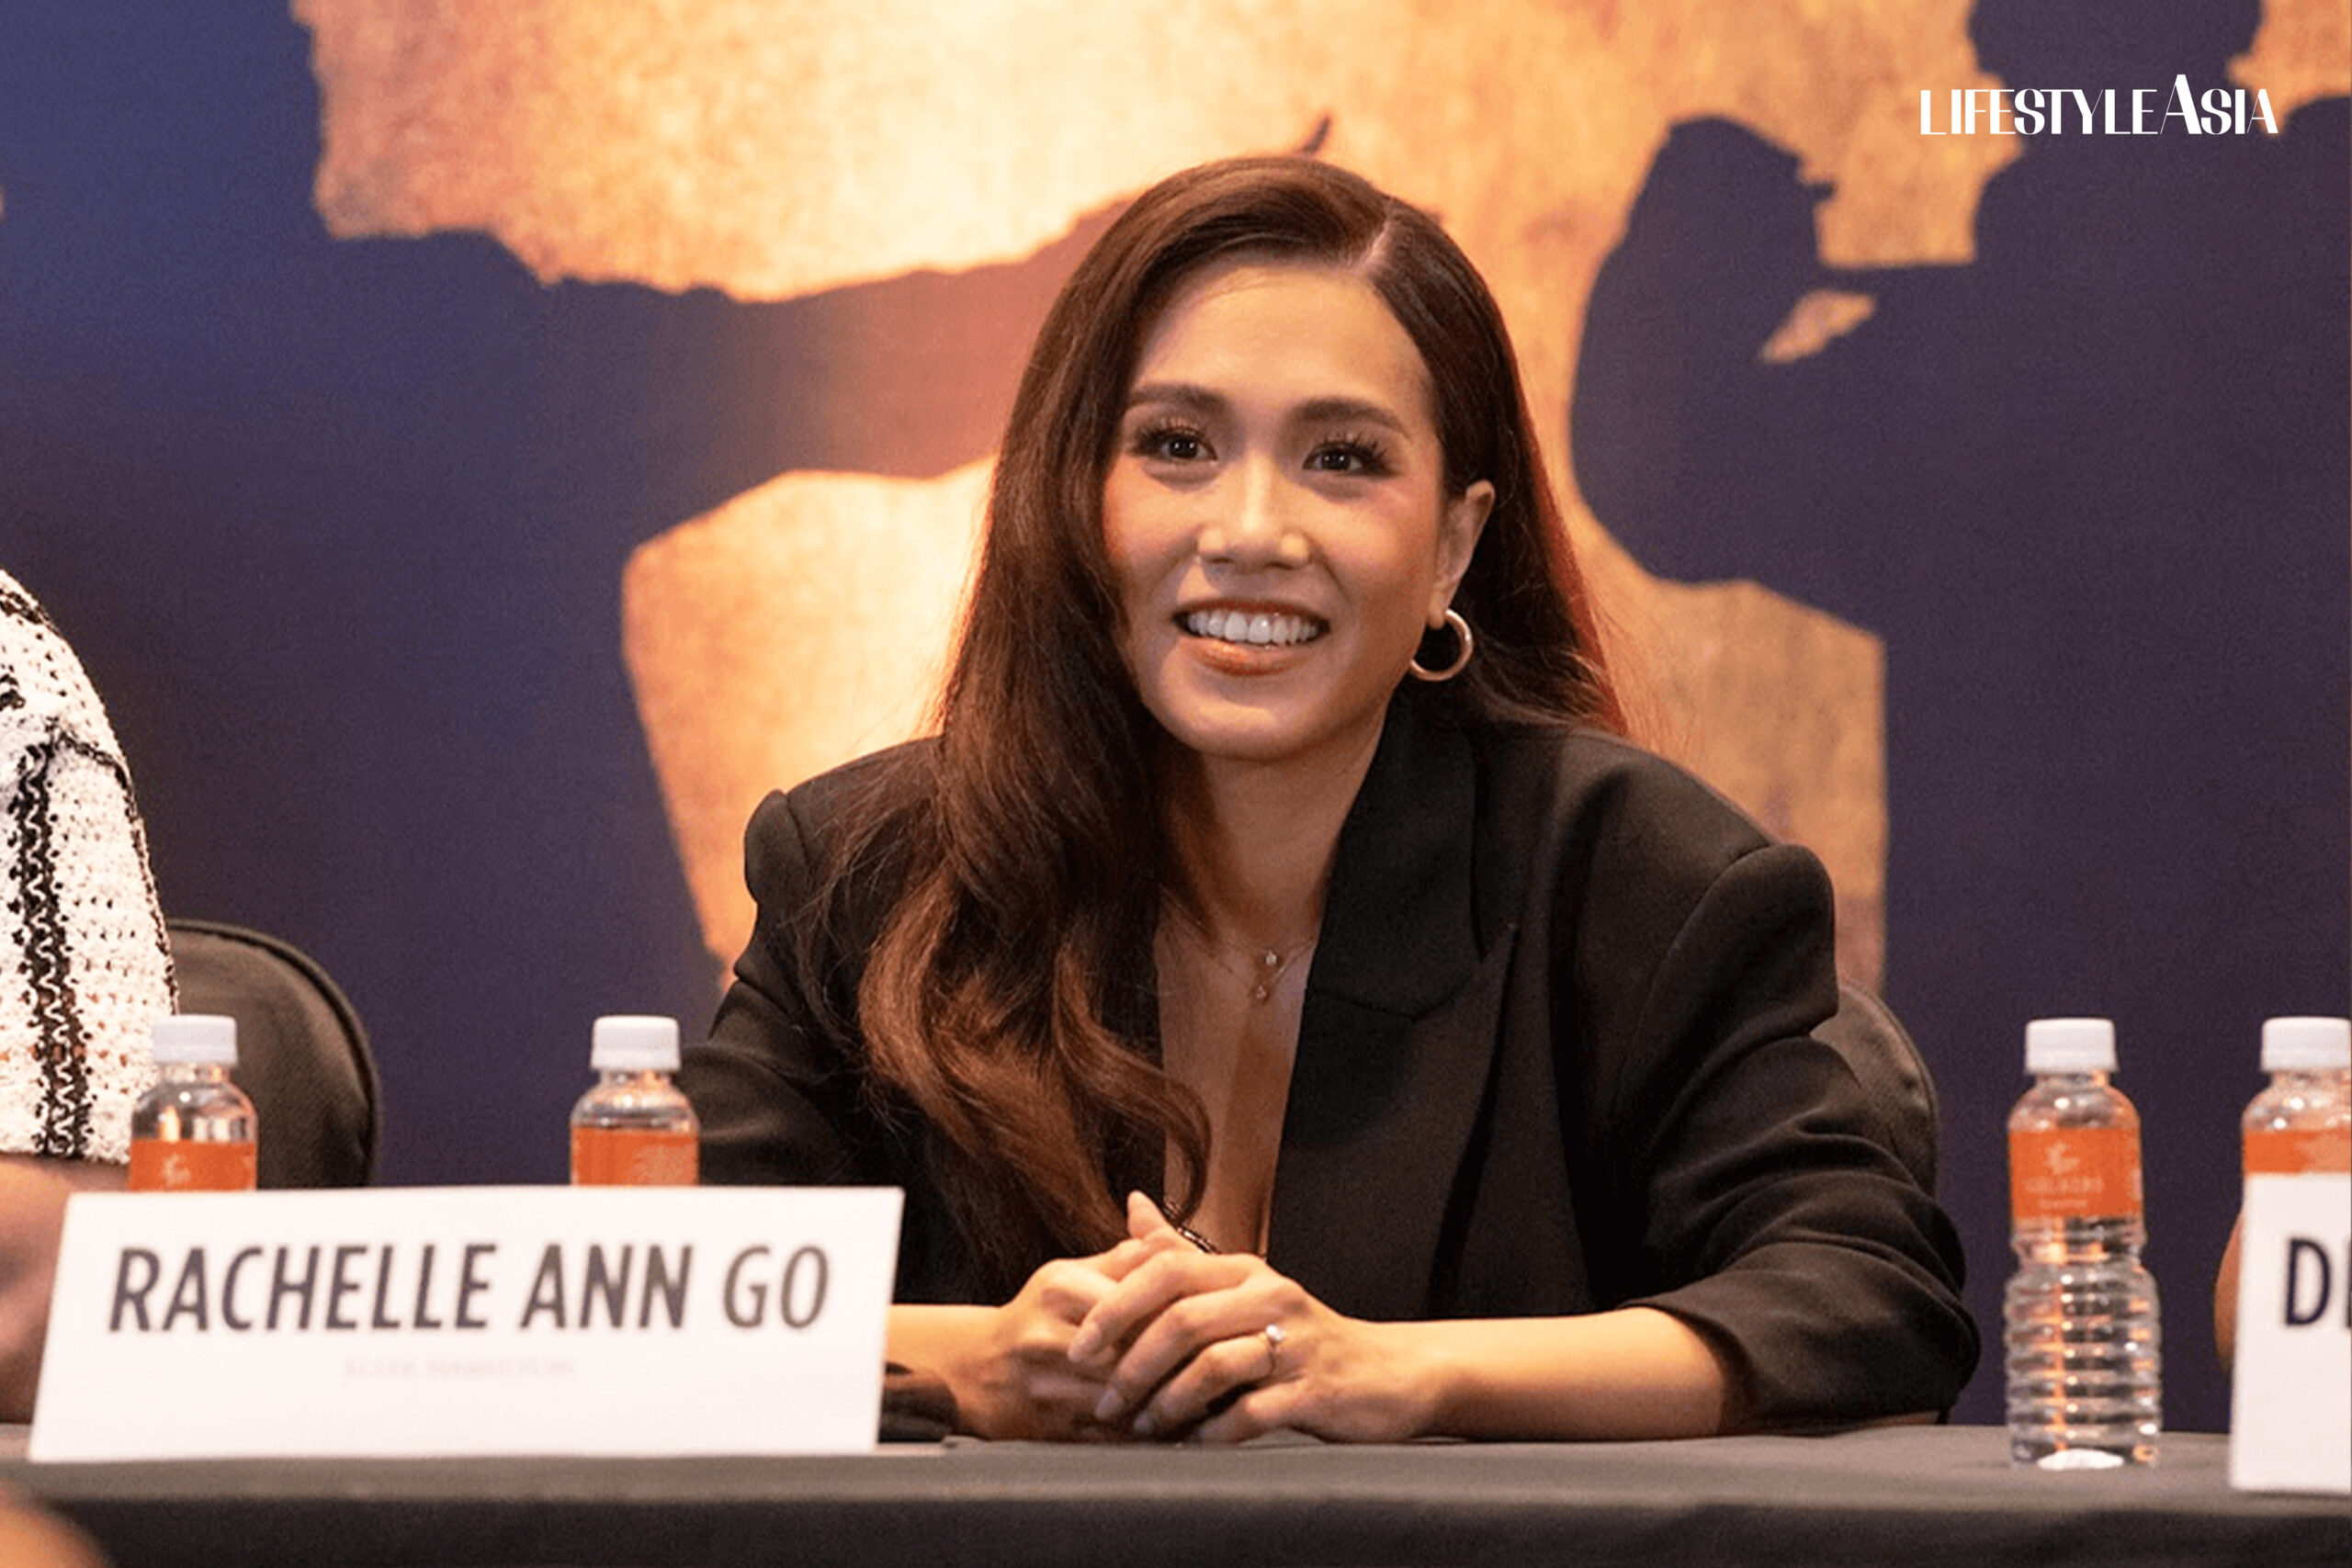 Rachelle Ann Go during the press conference